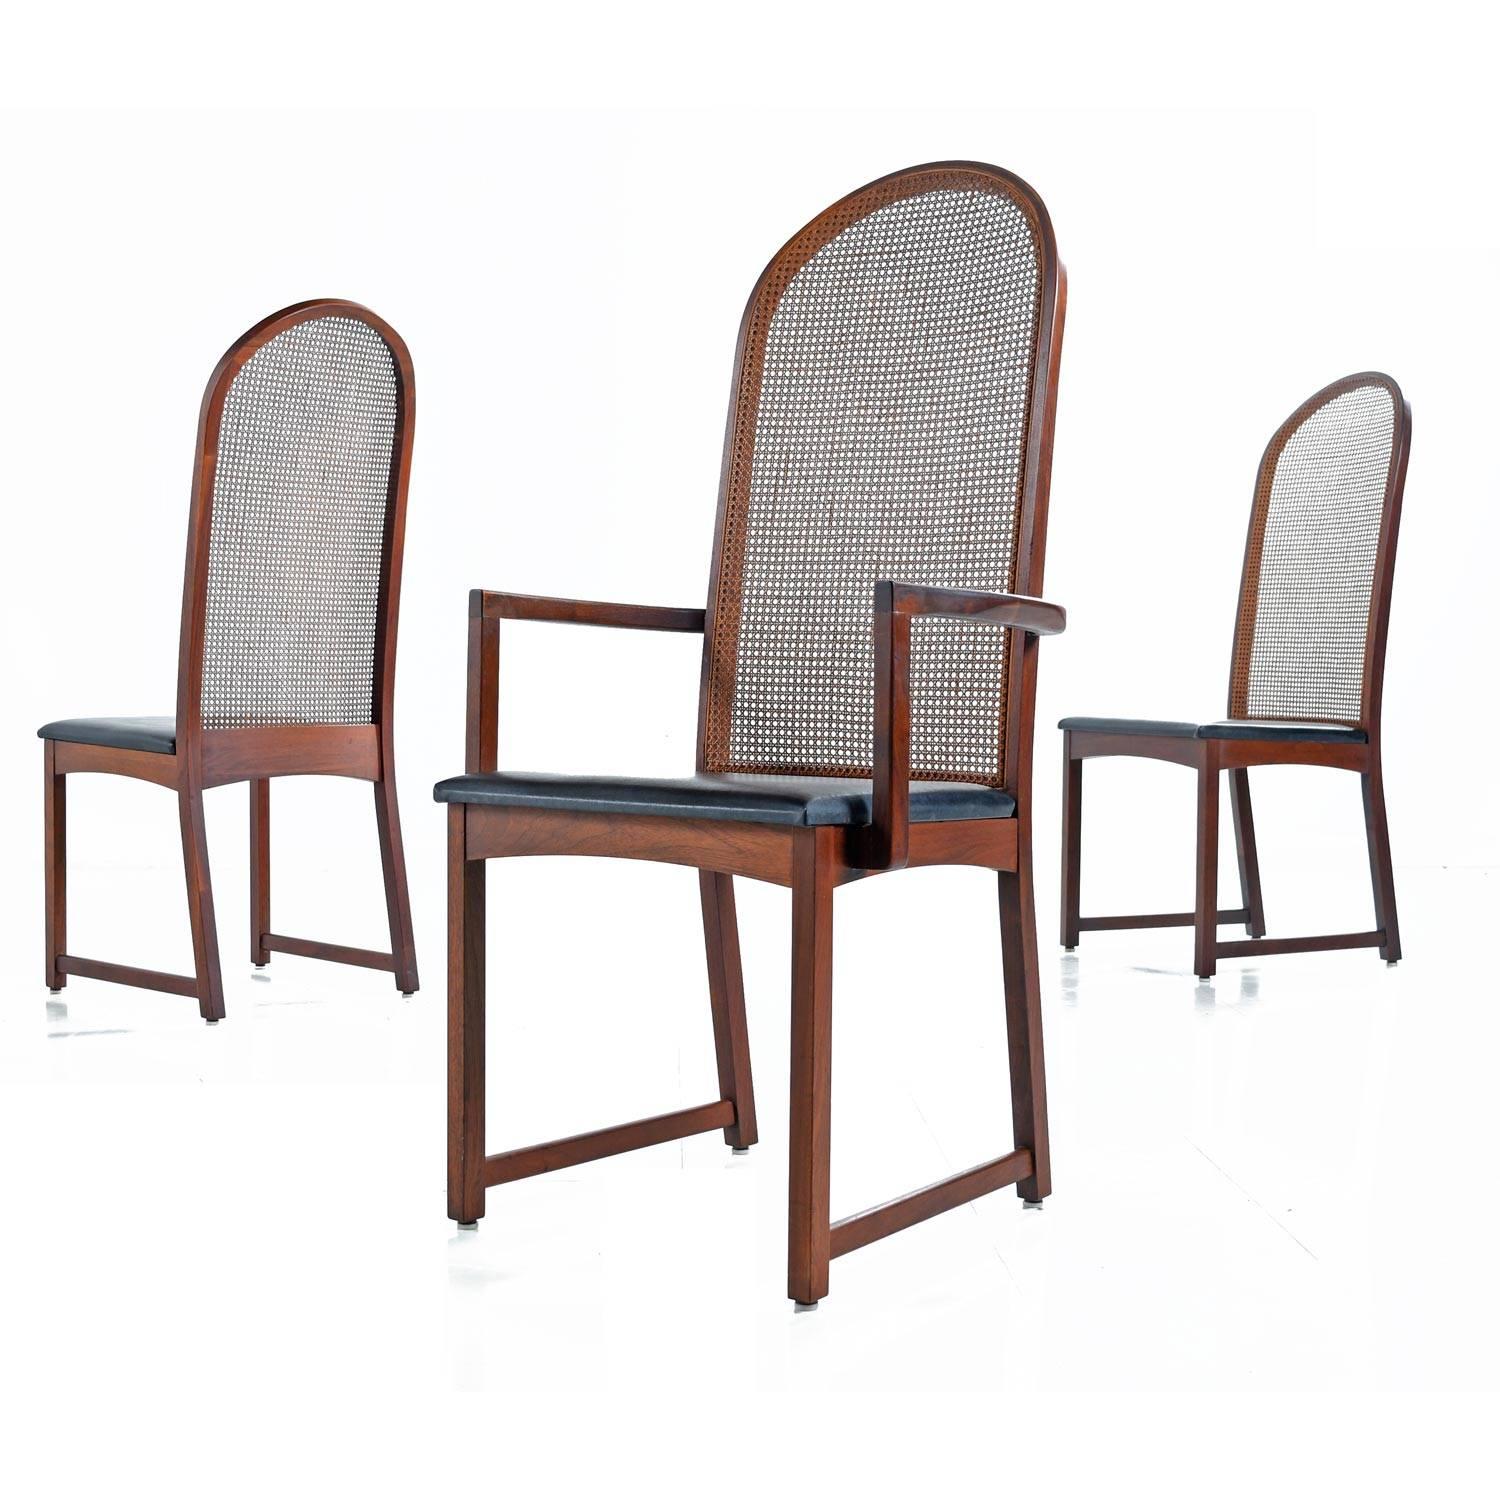 Set of six Milo Baughman for Dillingham walnut dining chairs. This set of six Mid-Century Modern chairs includes two captain's chairs with arms and four armless side chairs. Arched backs with sleek minimalist design, walnut frames, rattan backs and